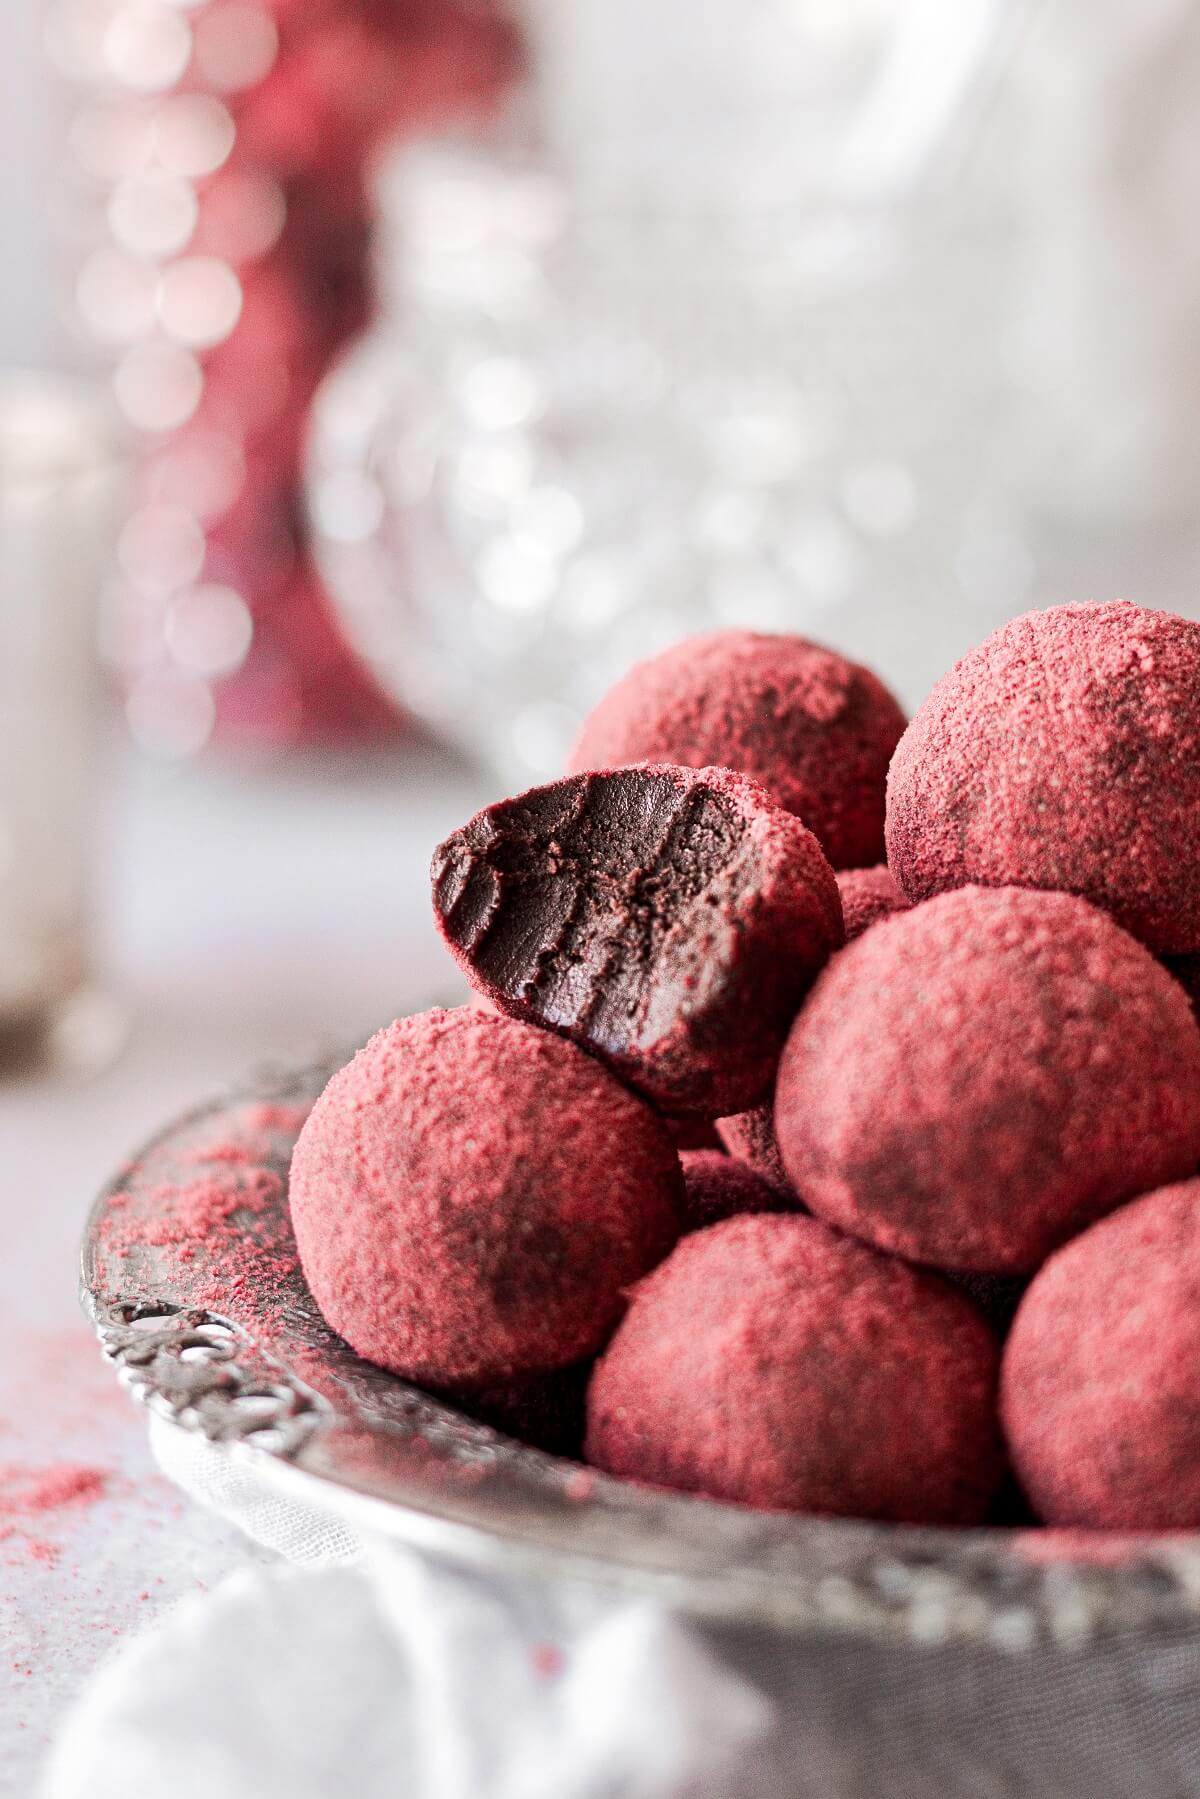 A silver bowl of chocolate strawberry truffles, one with a bite taken.